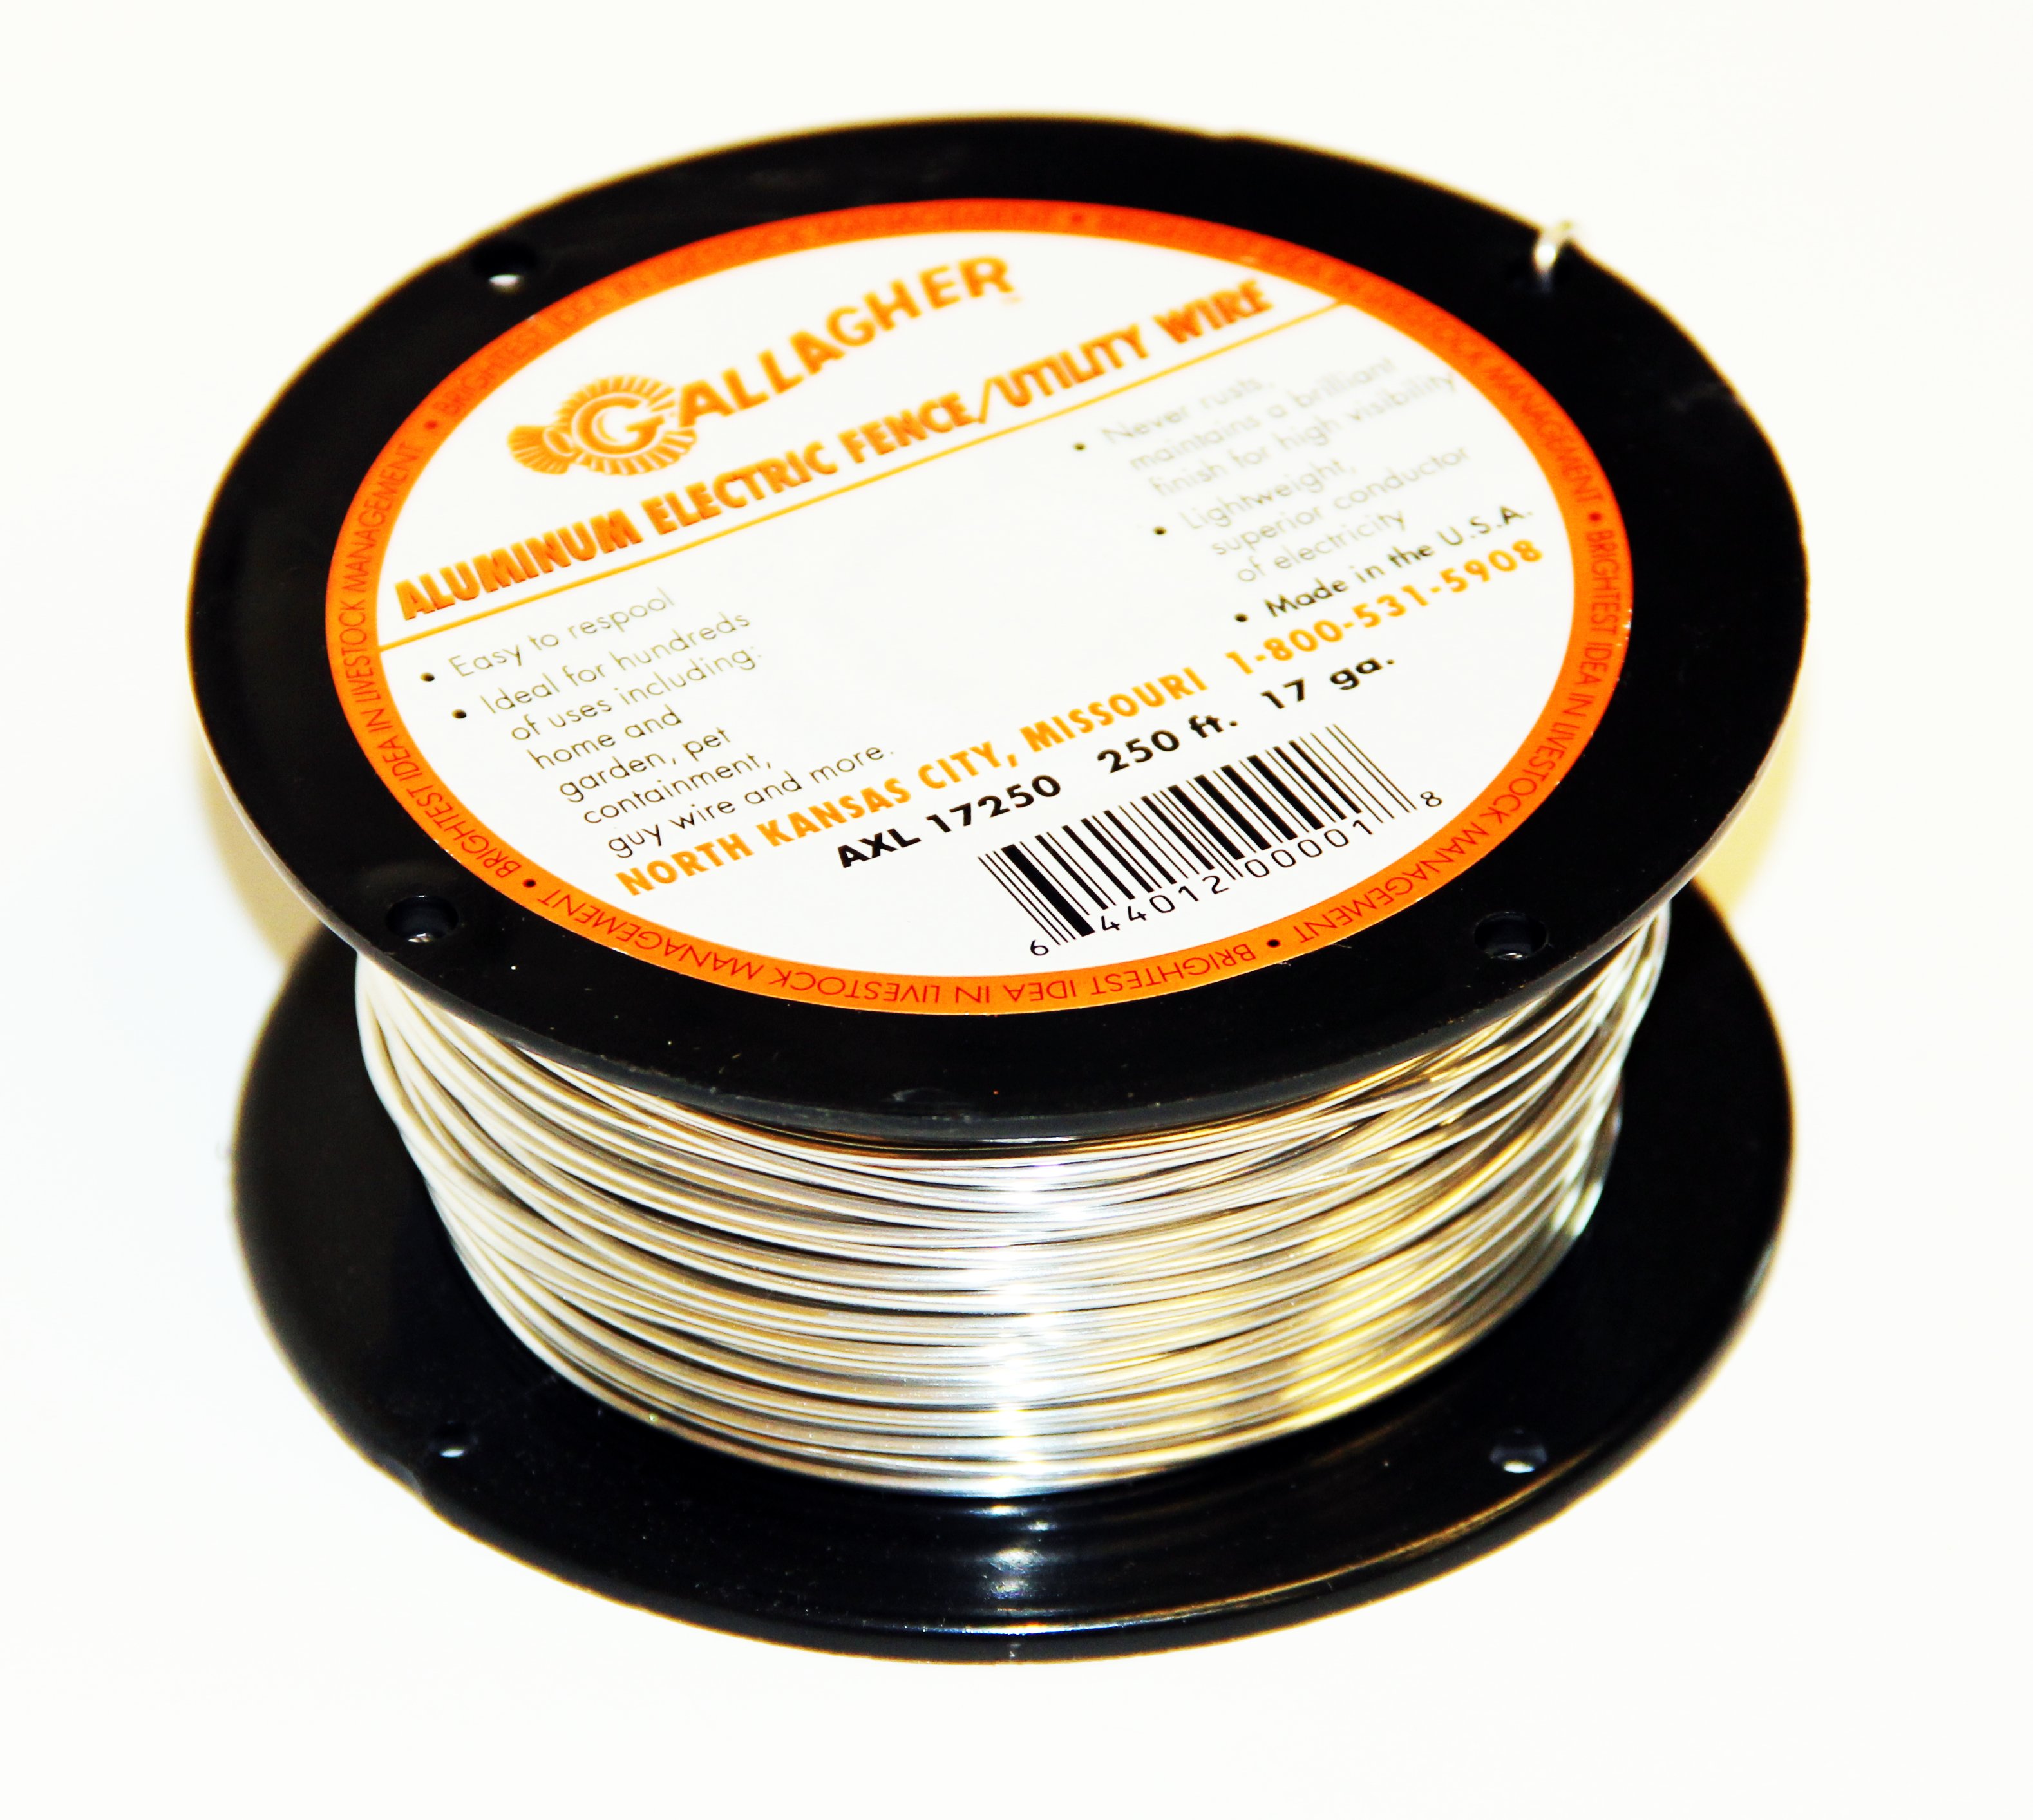 Gallagher XL Aluminum Fence Wire 17 ga x 250 ft